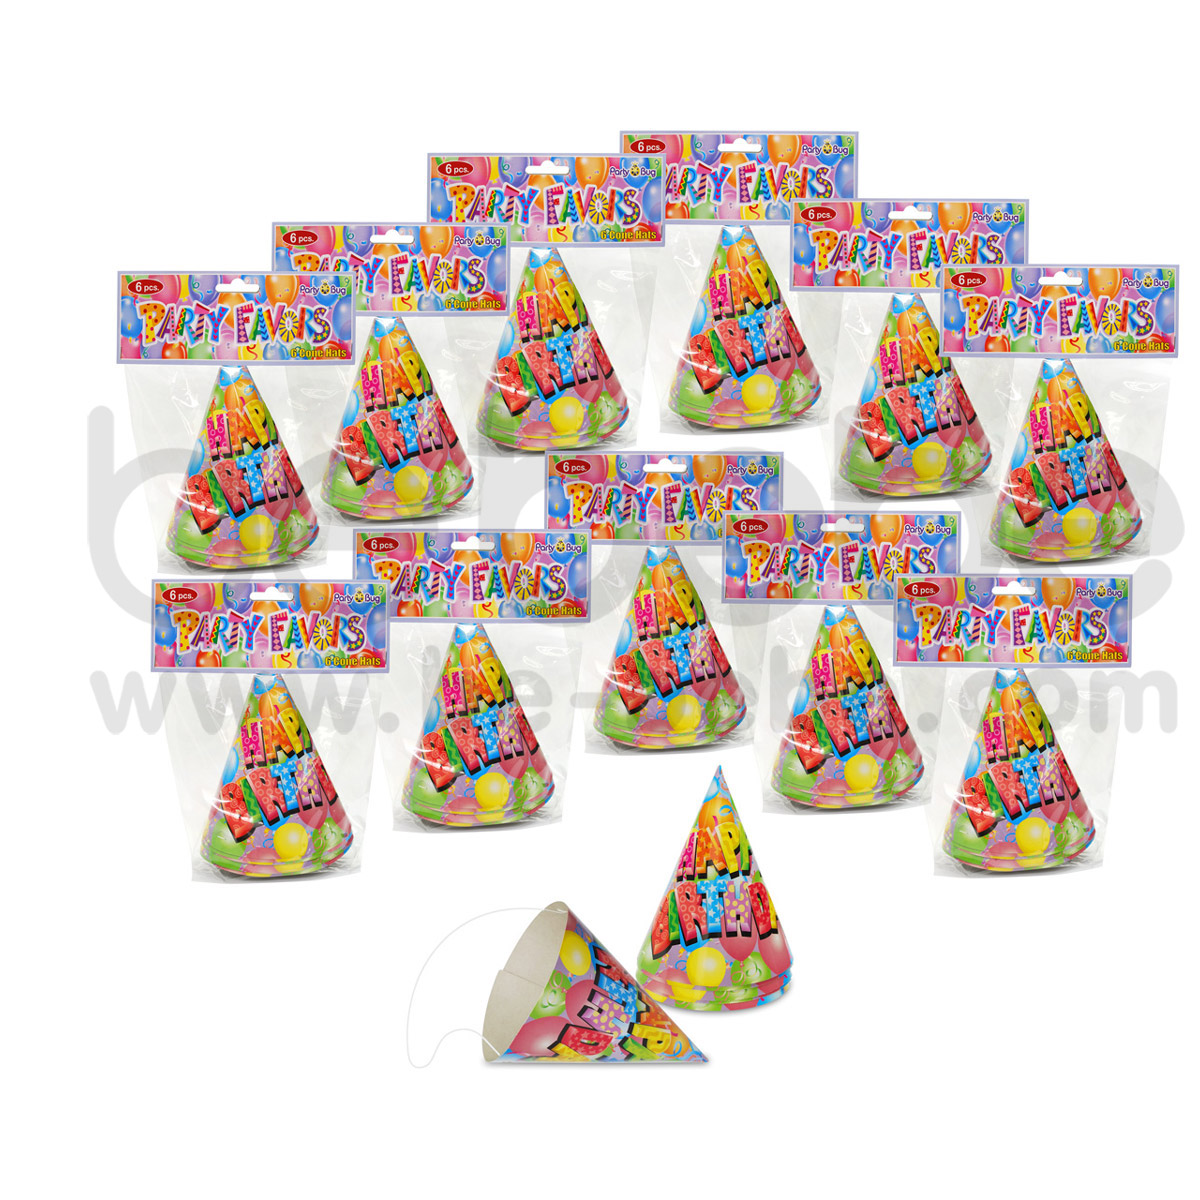 PARTY BUG : Cone hat 6 inch., 12 Packs